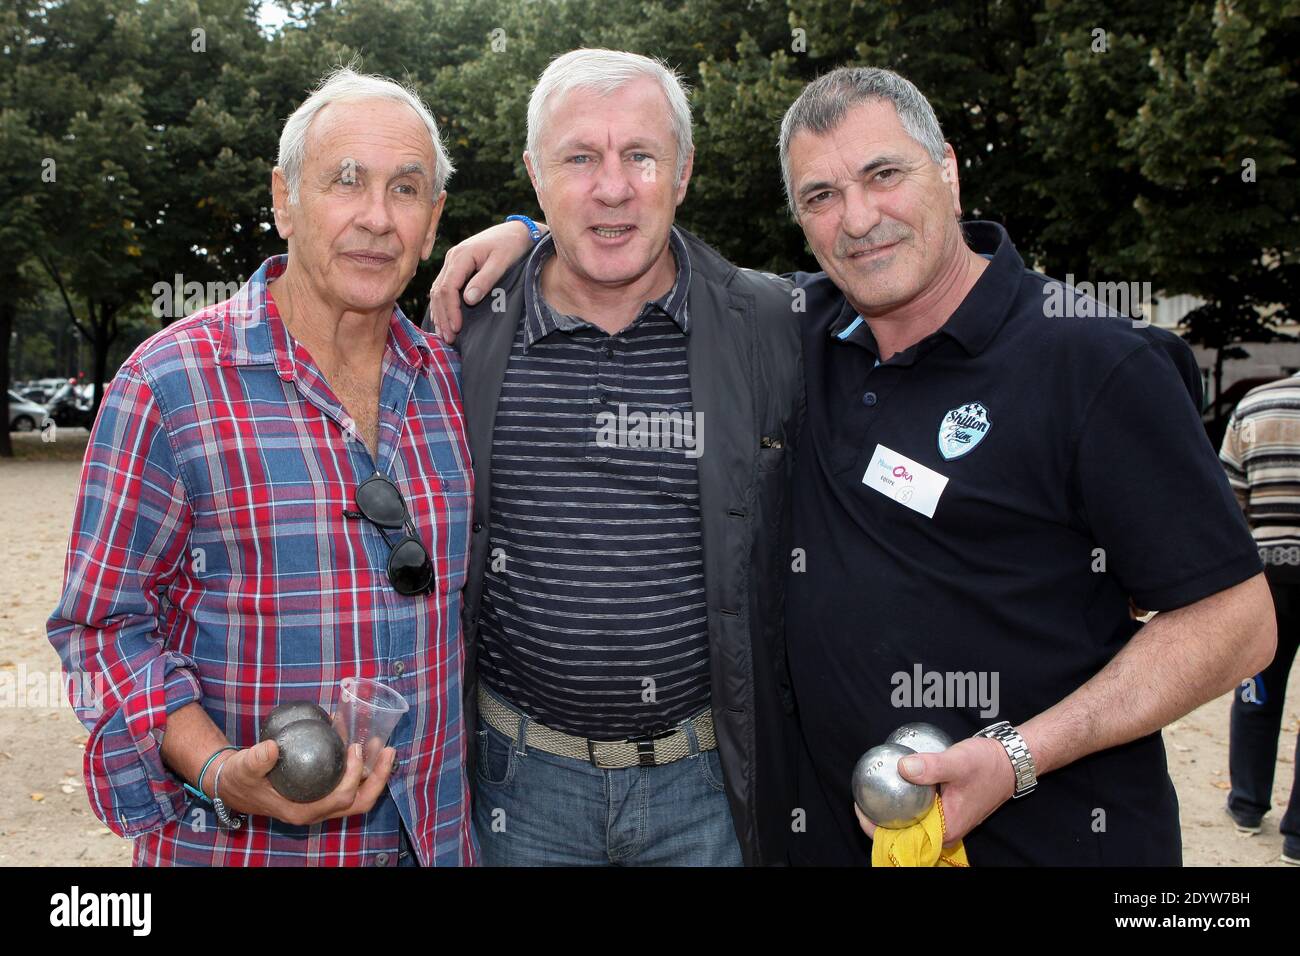 Patrice Laffont, Luis Fernandez and Jean-Marie Bigard attending The Petanque  Tournament to benefit the association 'Meghanora' held at Place des  Invalides in Paris, France, on September 29, 2013. Photo by Audrey  Poree/ABACAPRESS.COM